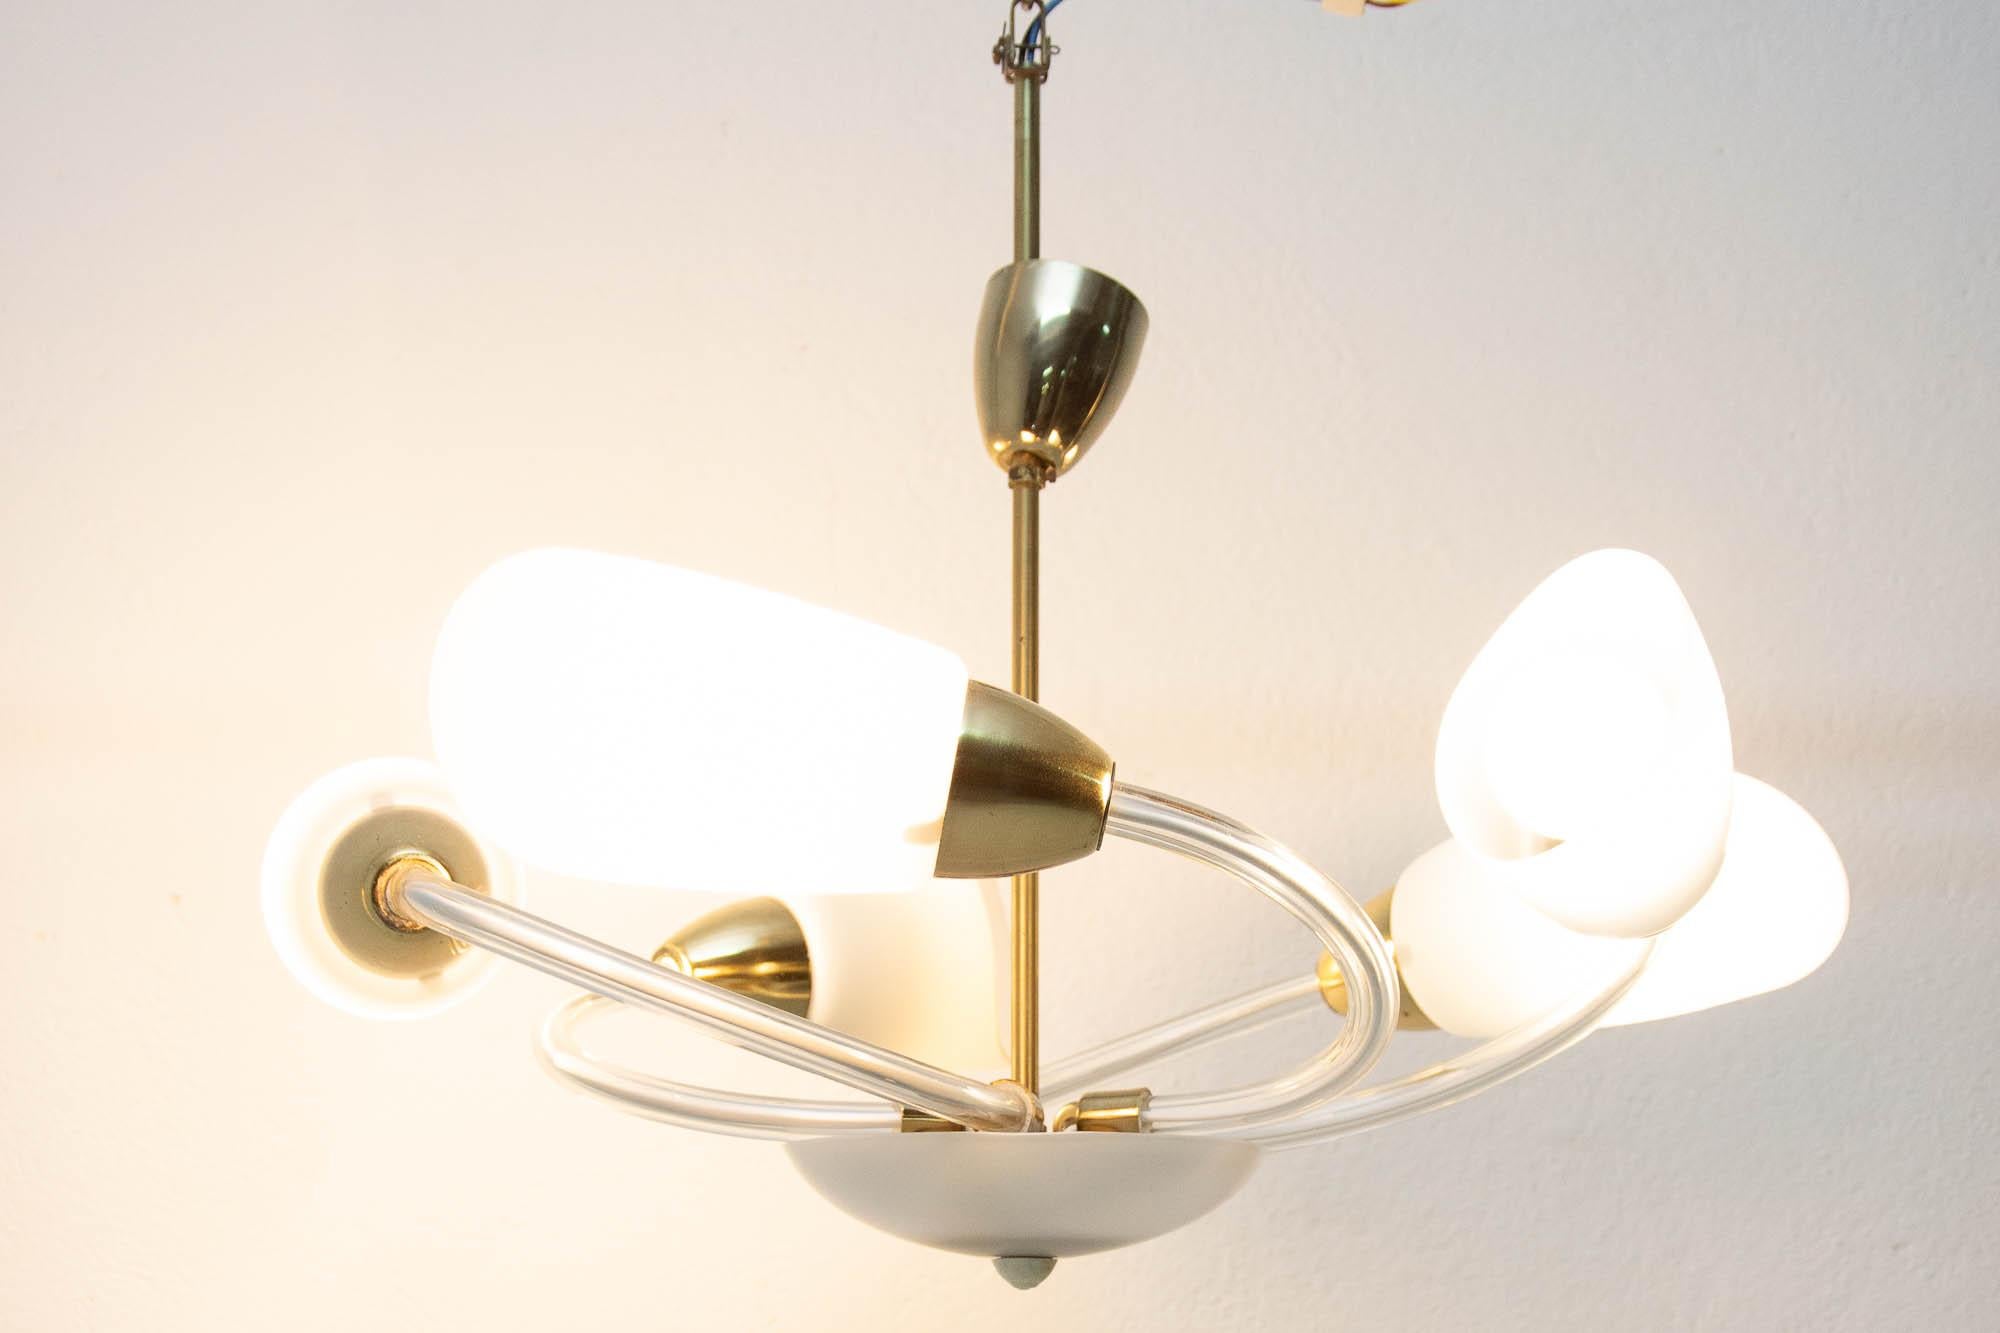 Midcentury brass and glass pendant lamp in the shape of the bloom, it was made in Czechoslovakia in the 1960s. In very good condition, new wiring.